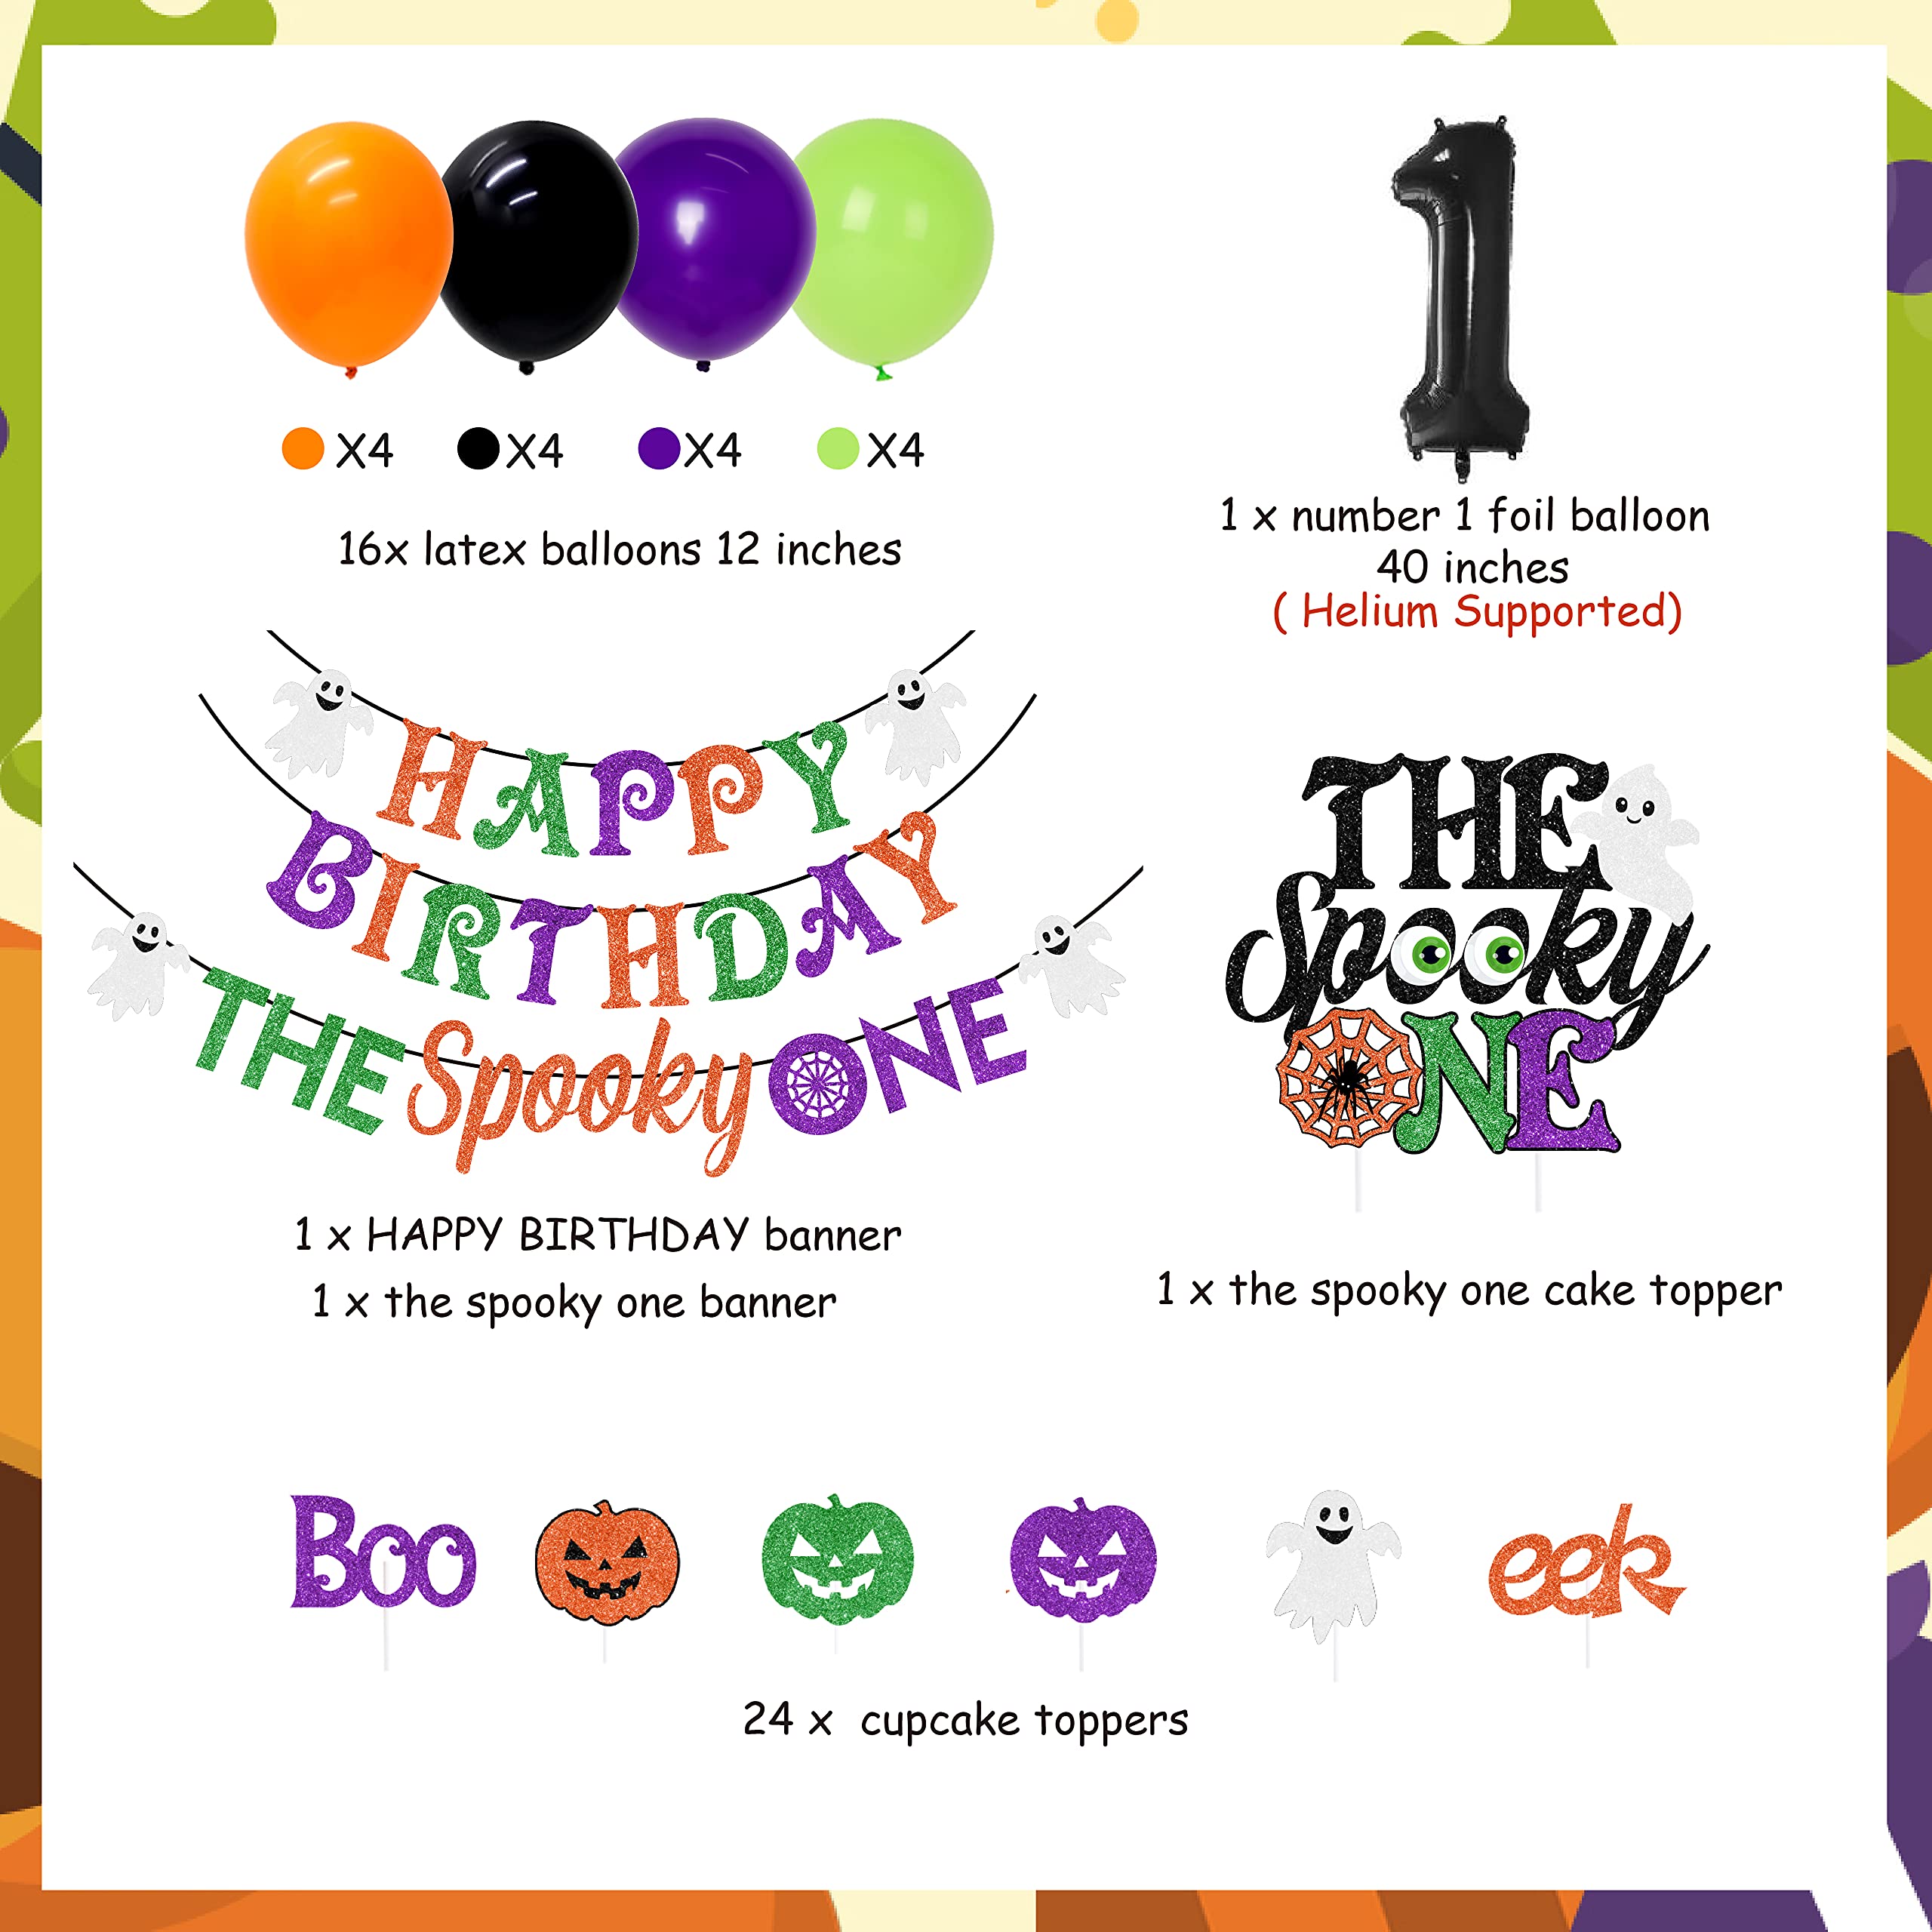 Fangleland Halloween 1st Birthday Party Decorations - The Spooky One Happy Birthday Banner Garland Cake Toppers Number 1 Balloon for Boy Girl Halloween Spooky One First Birthday